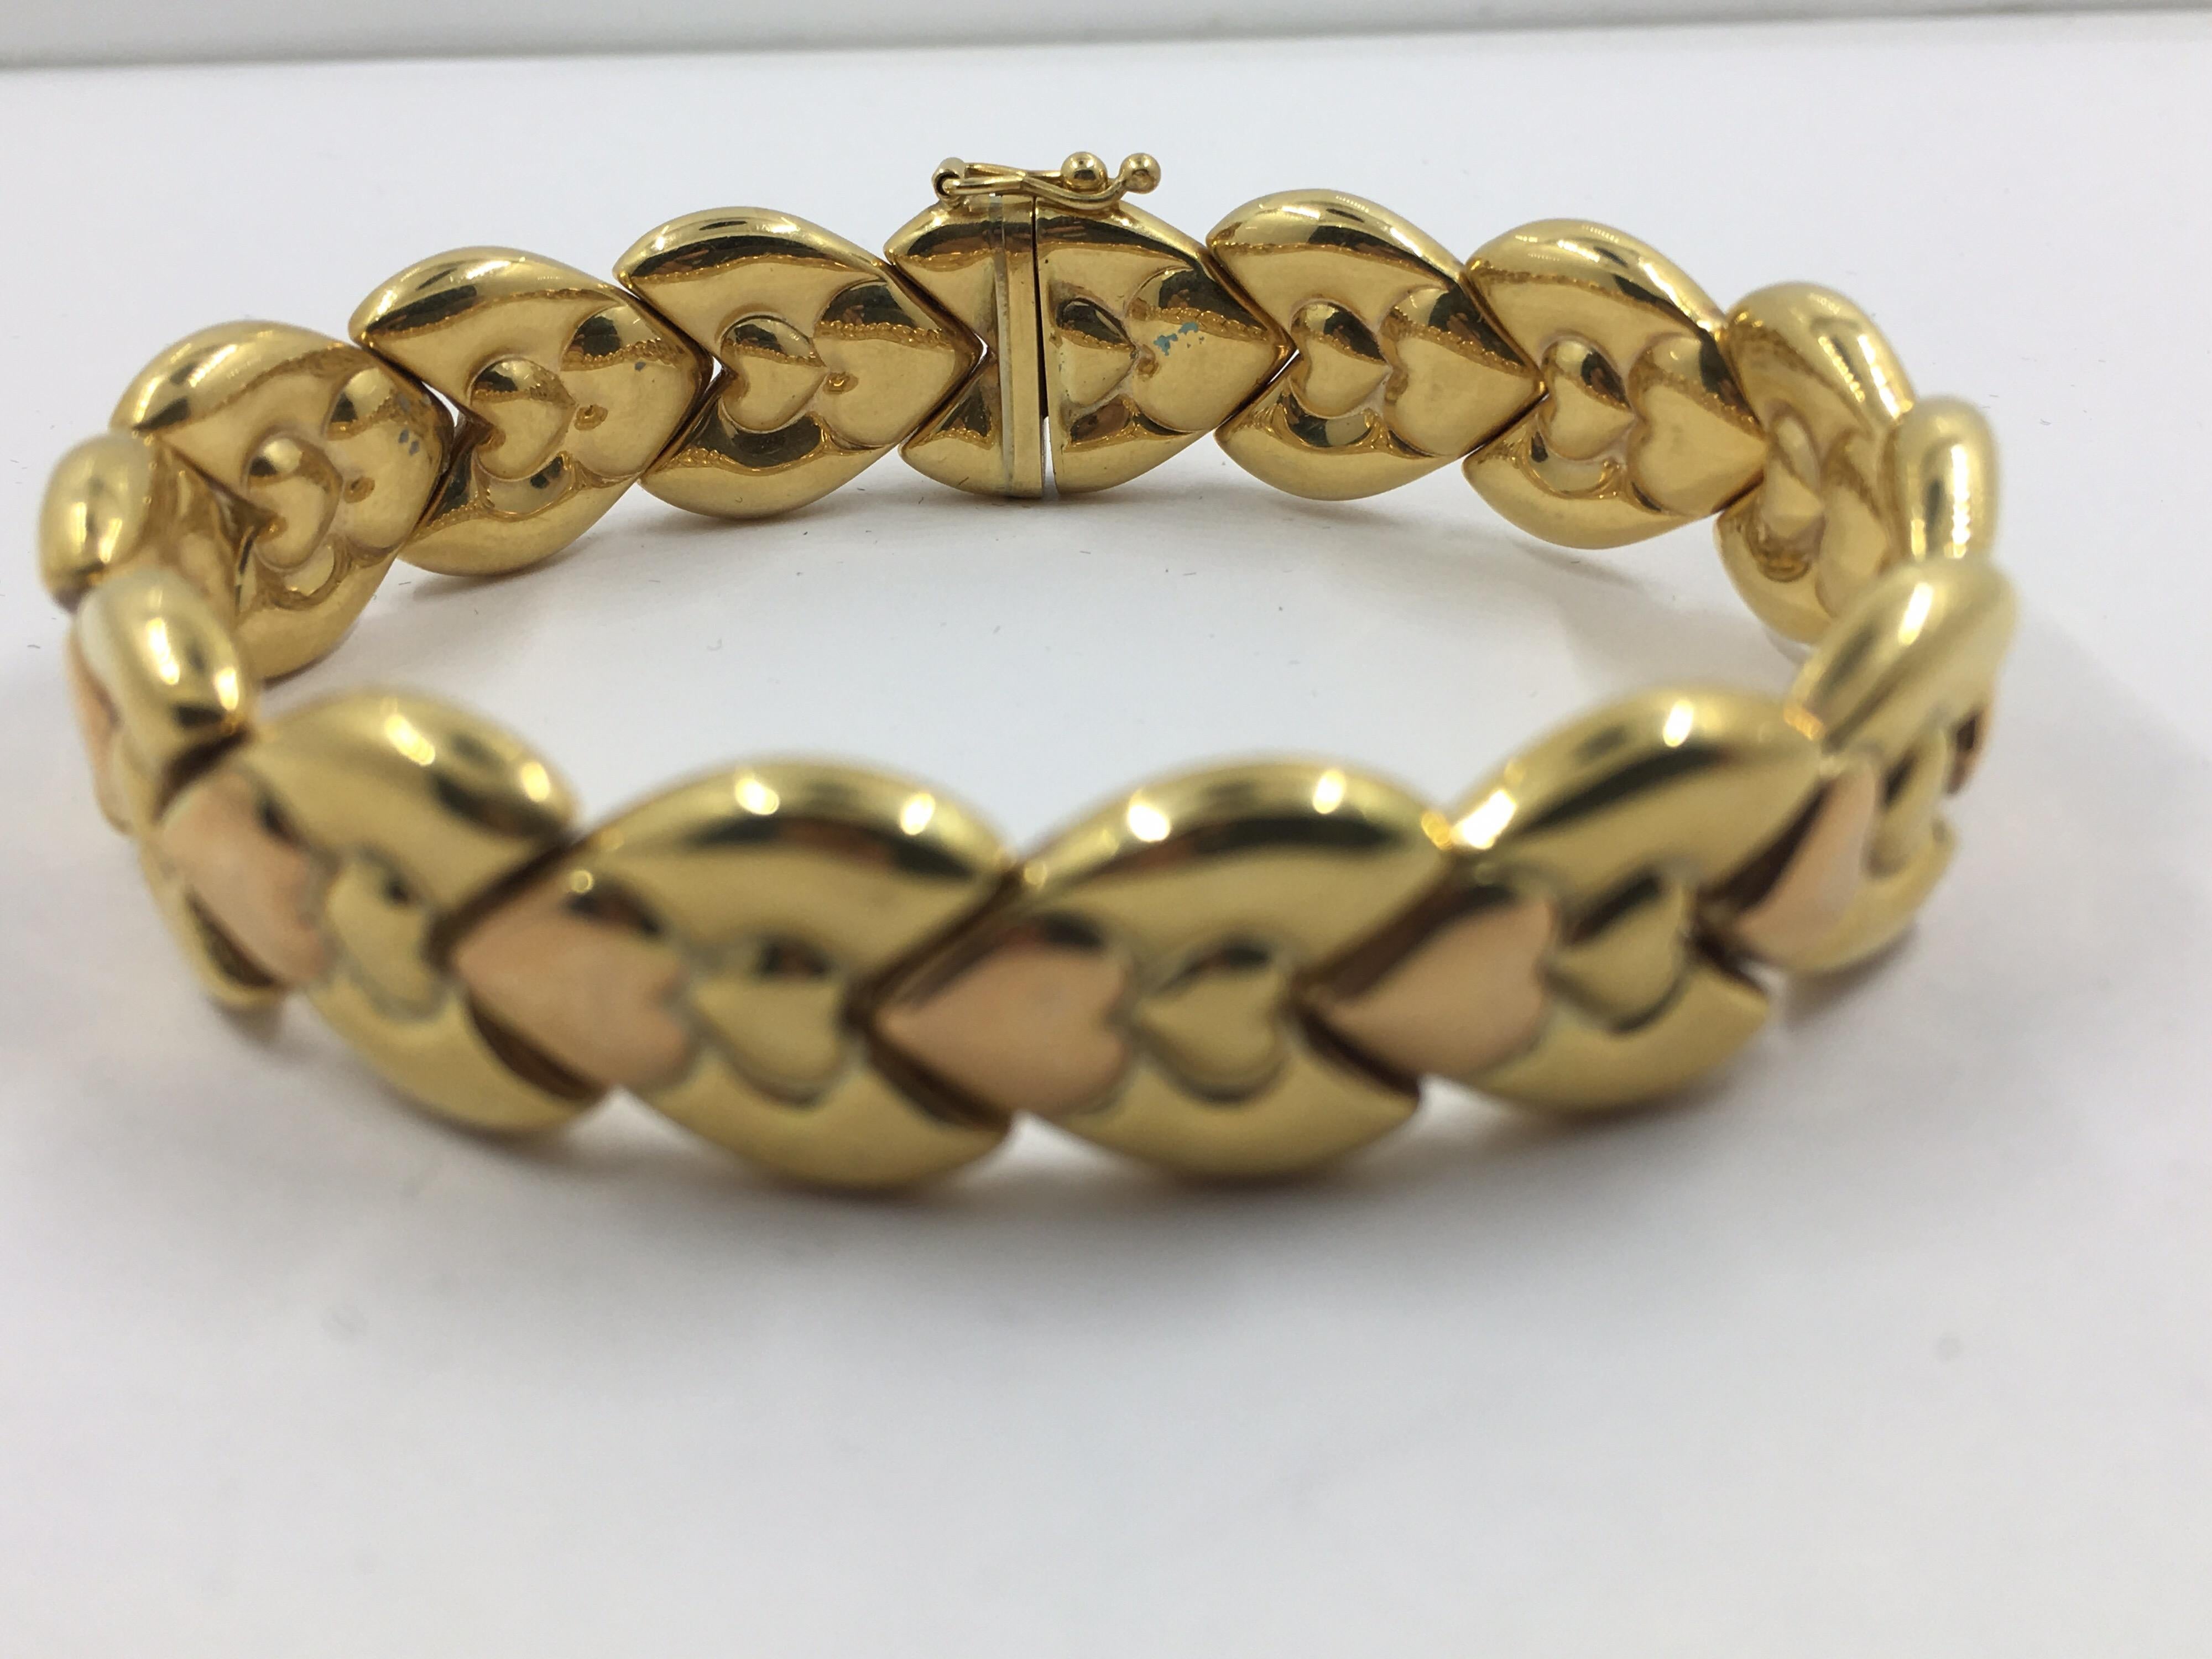 14 Kt Gold Bracelet
1 side is all yellow
flip side is pink and yellow gold
can be worn on either side